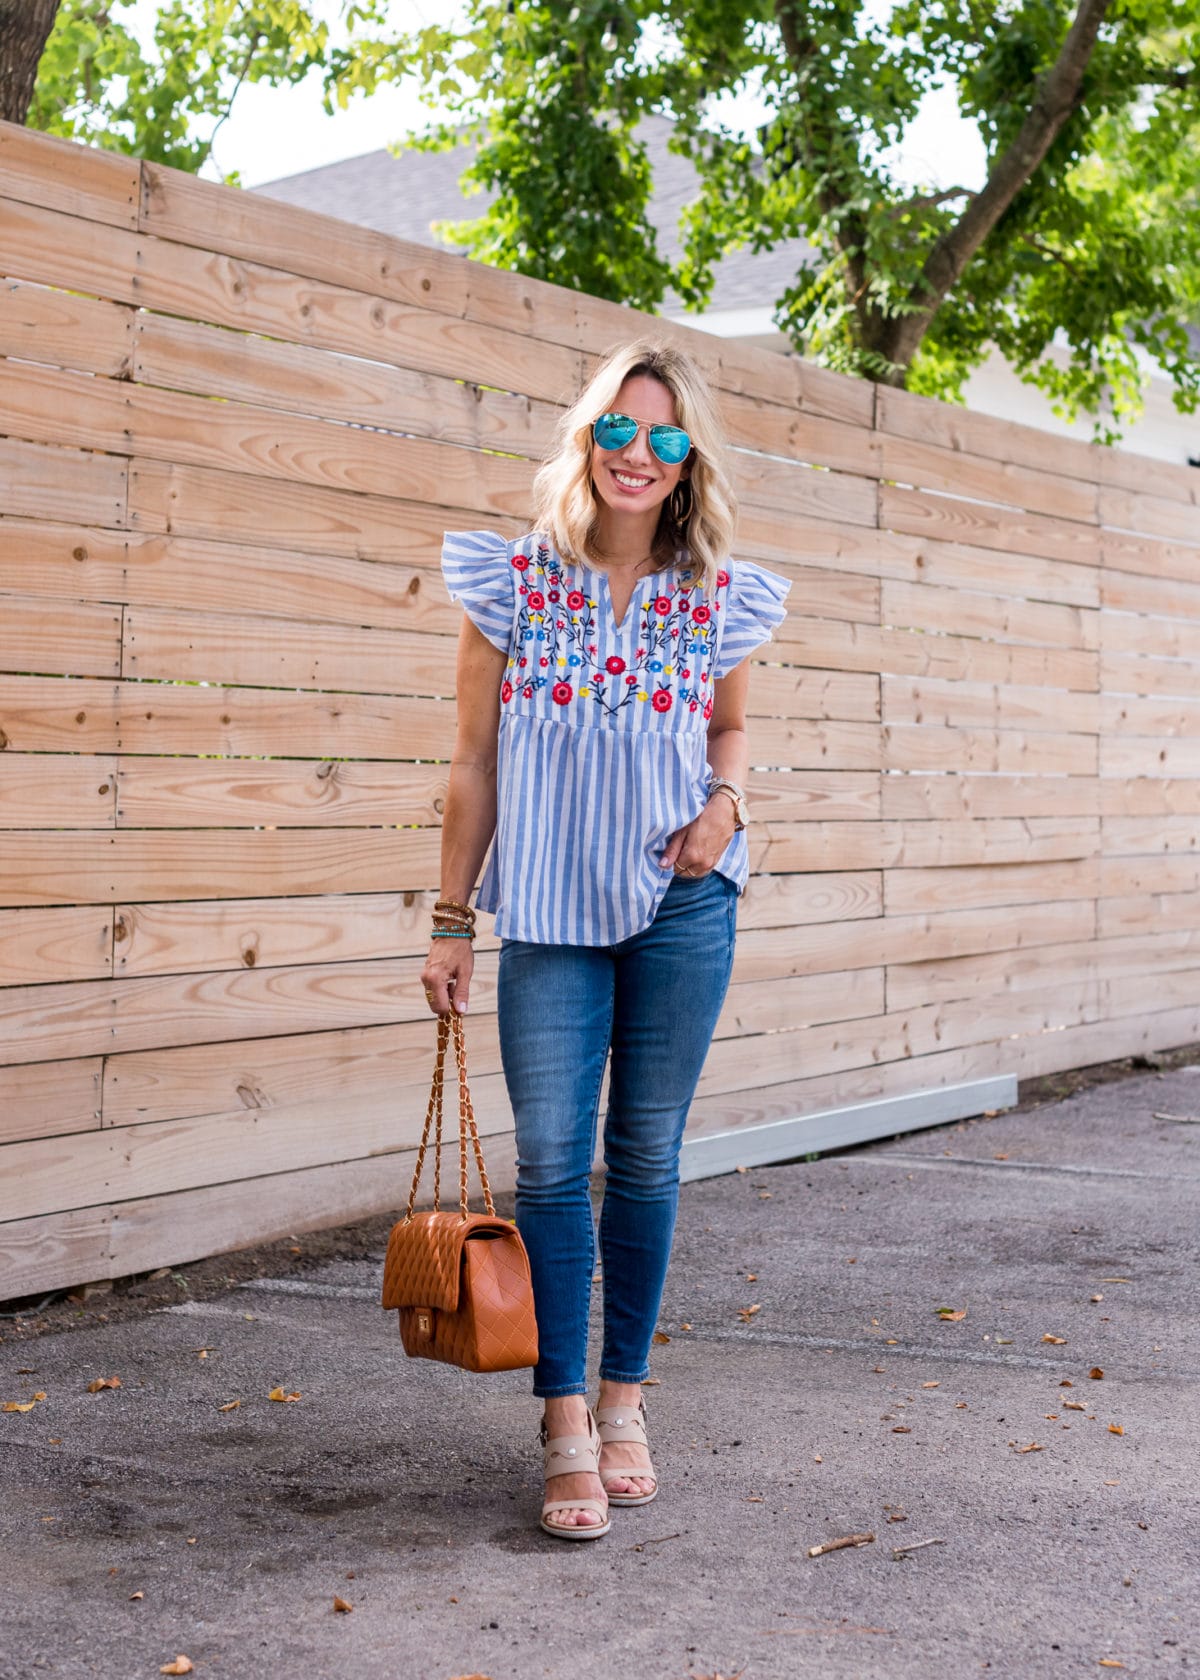 Embroidered Top and Jeans